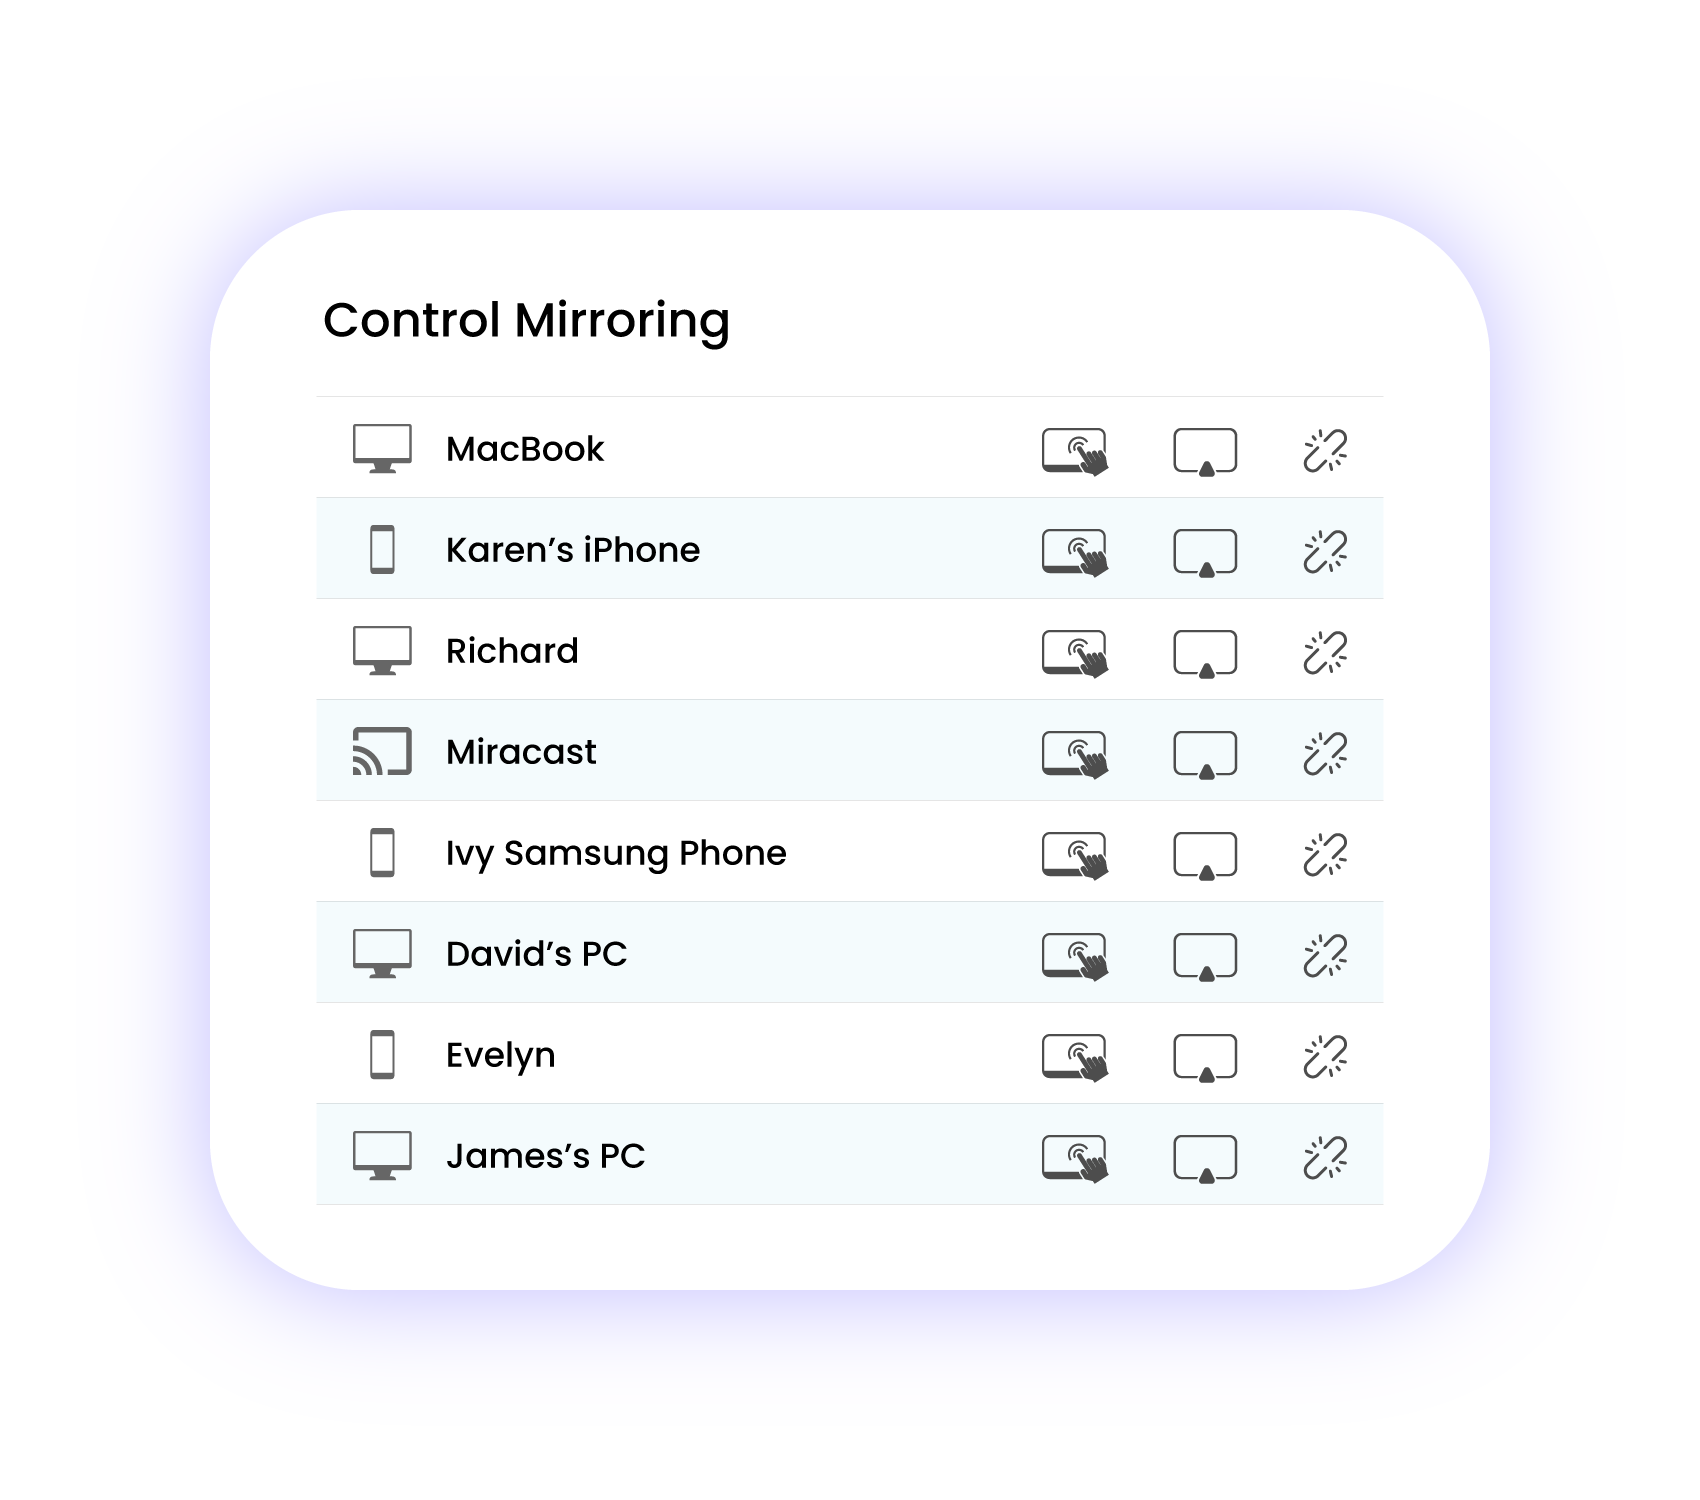 insphere Share Control Mirroring